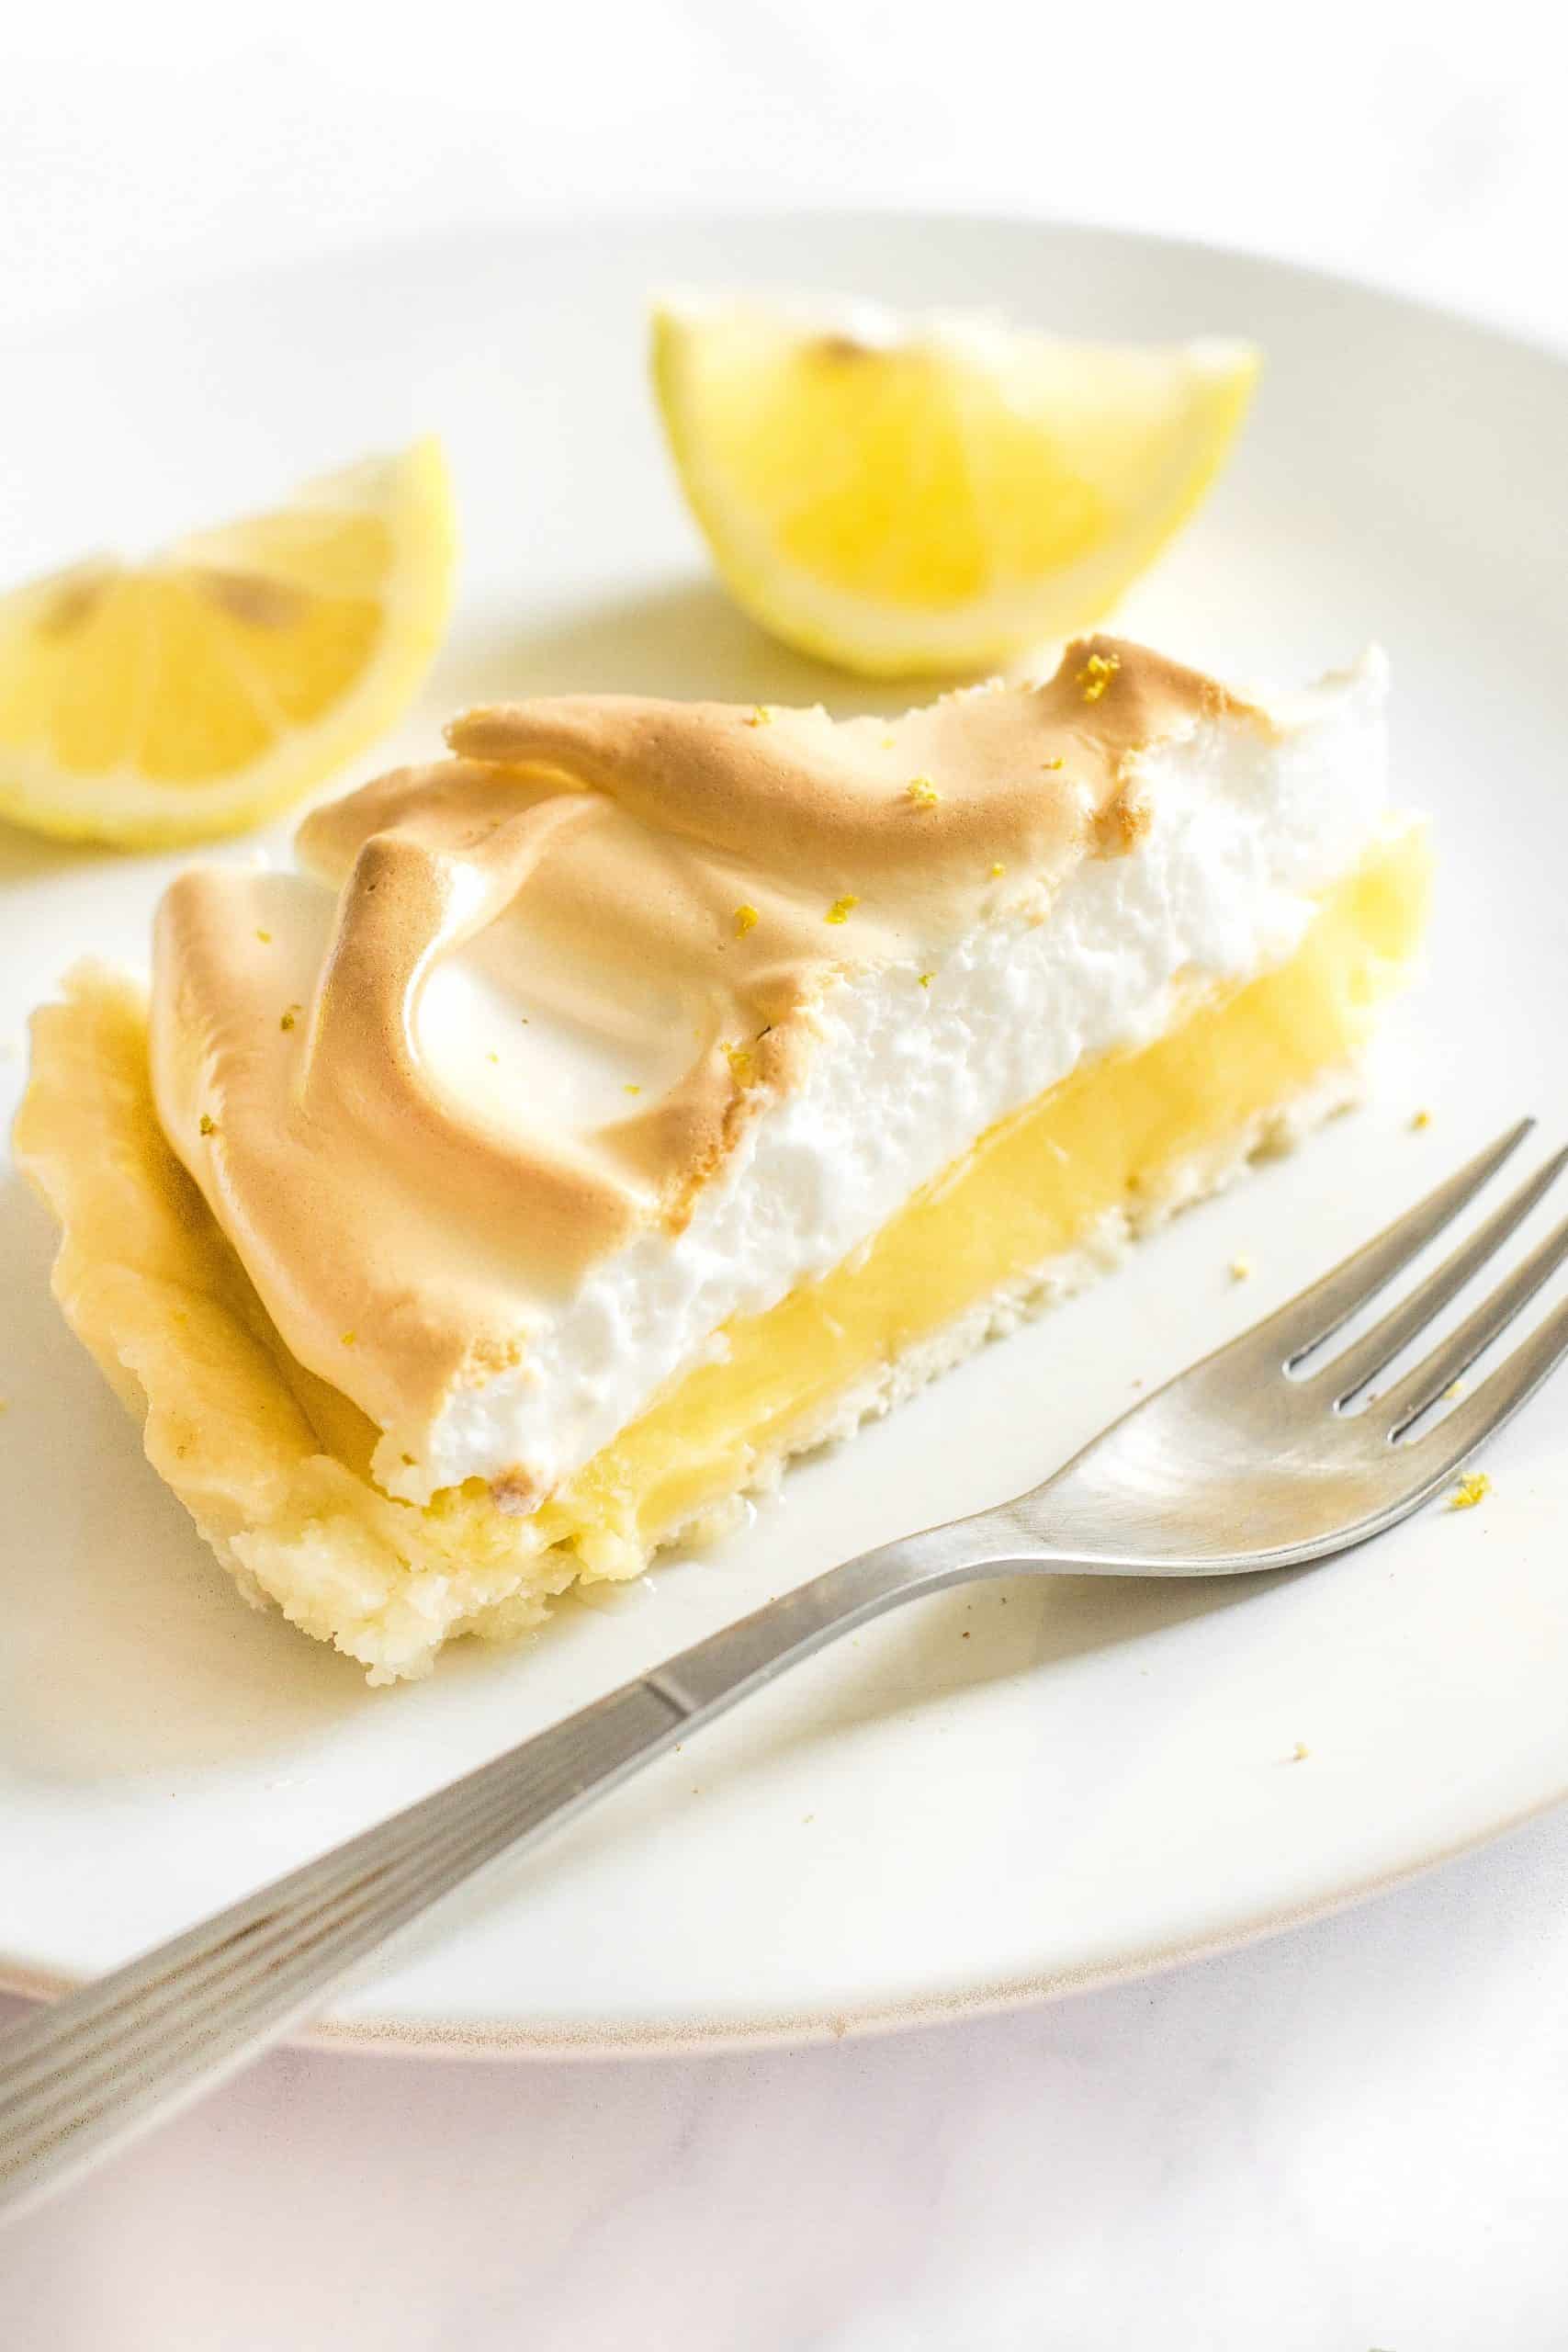 A close up of a slice of gluten-free lemon meringue pie and a fork on a plate.